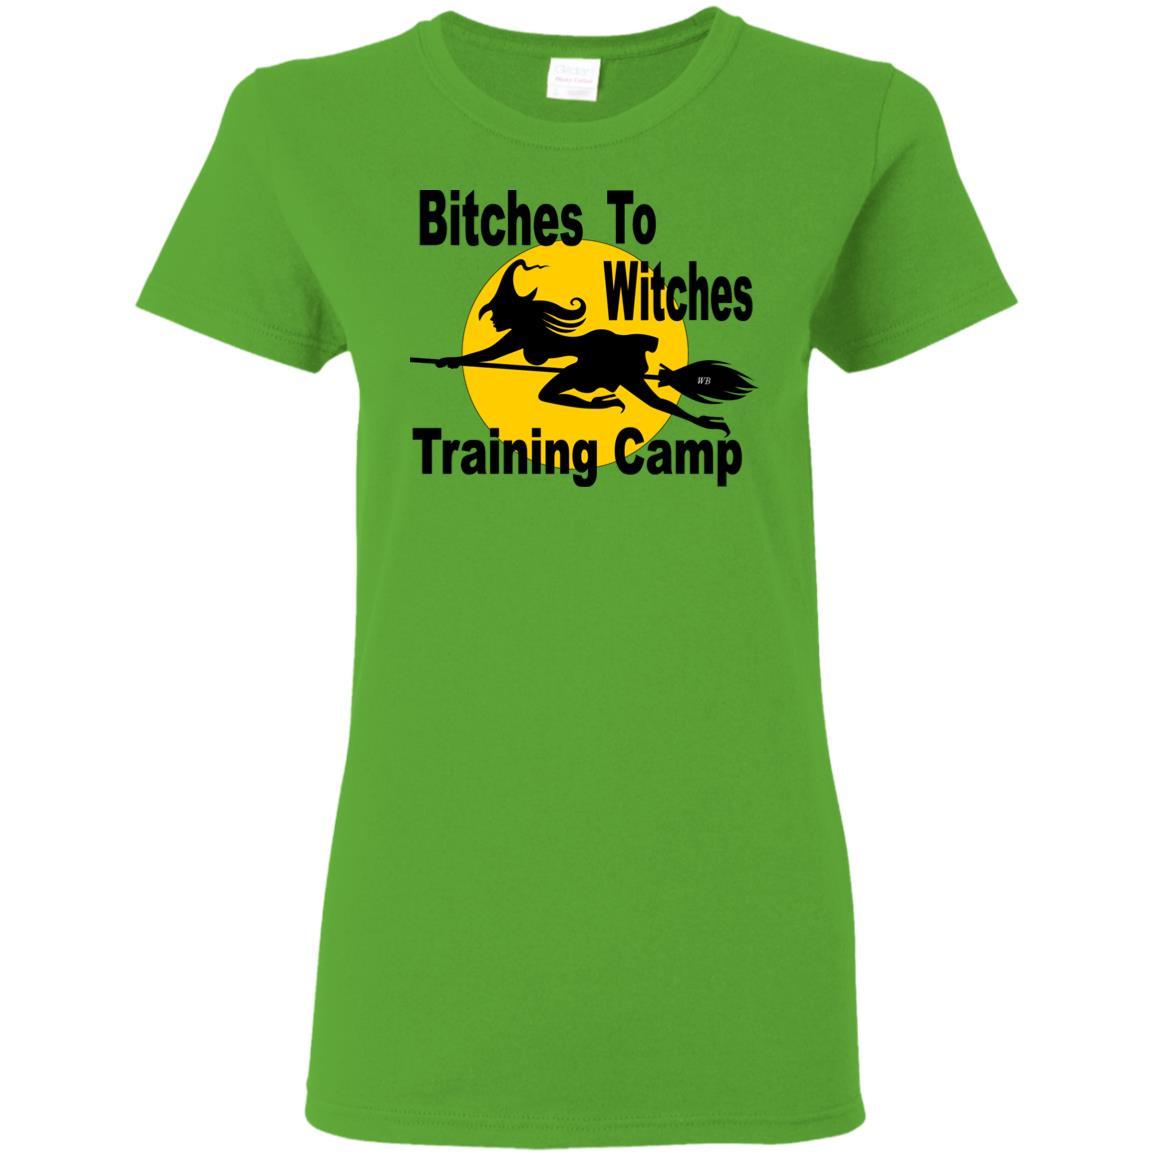 T-Shirts Electric Green / S WineyBitches.Co "Bitches To Witches Training Camp" Halloween Ladies' 5.3 oz. T-Shirt WineyBitchesCo